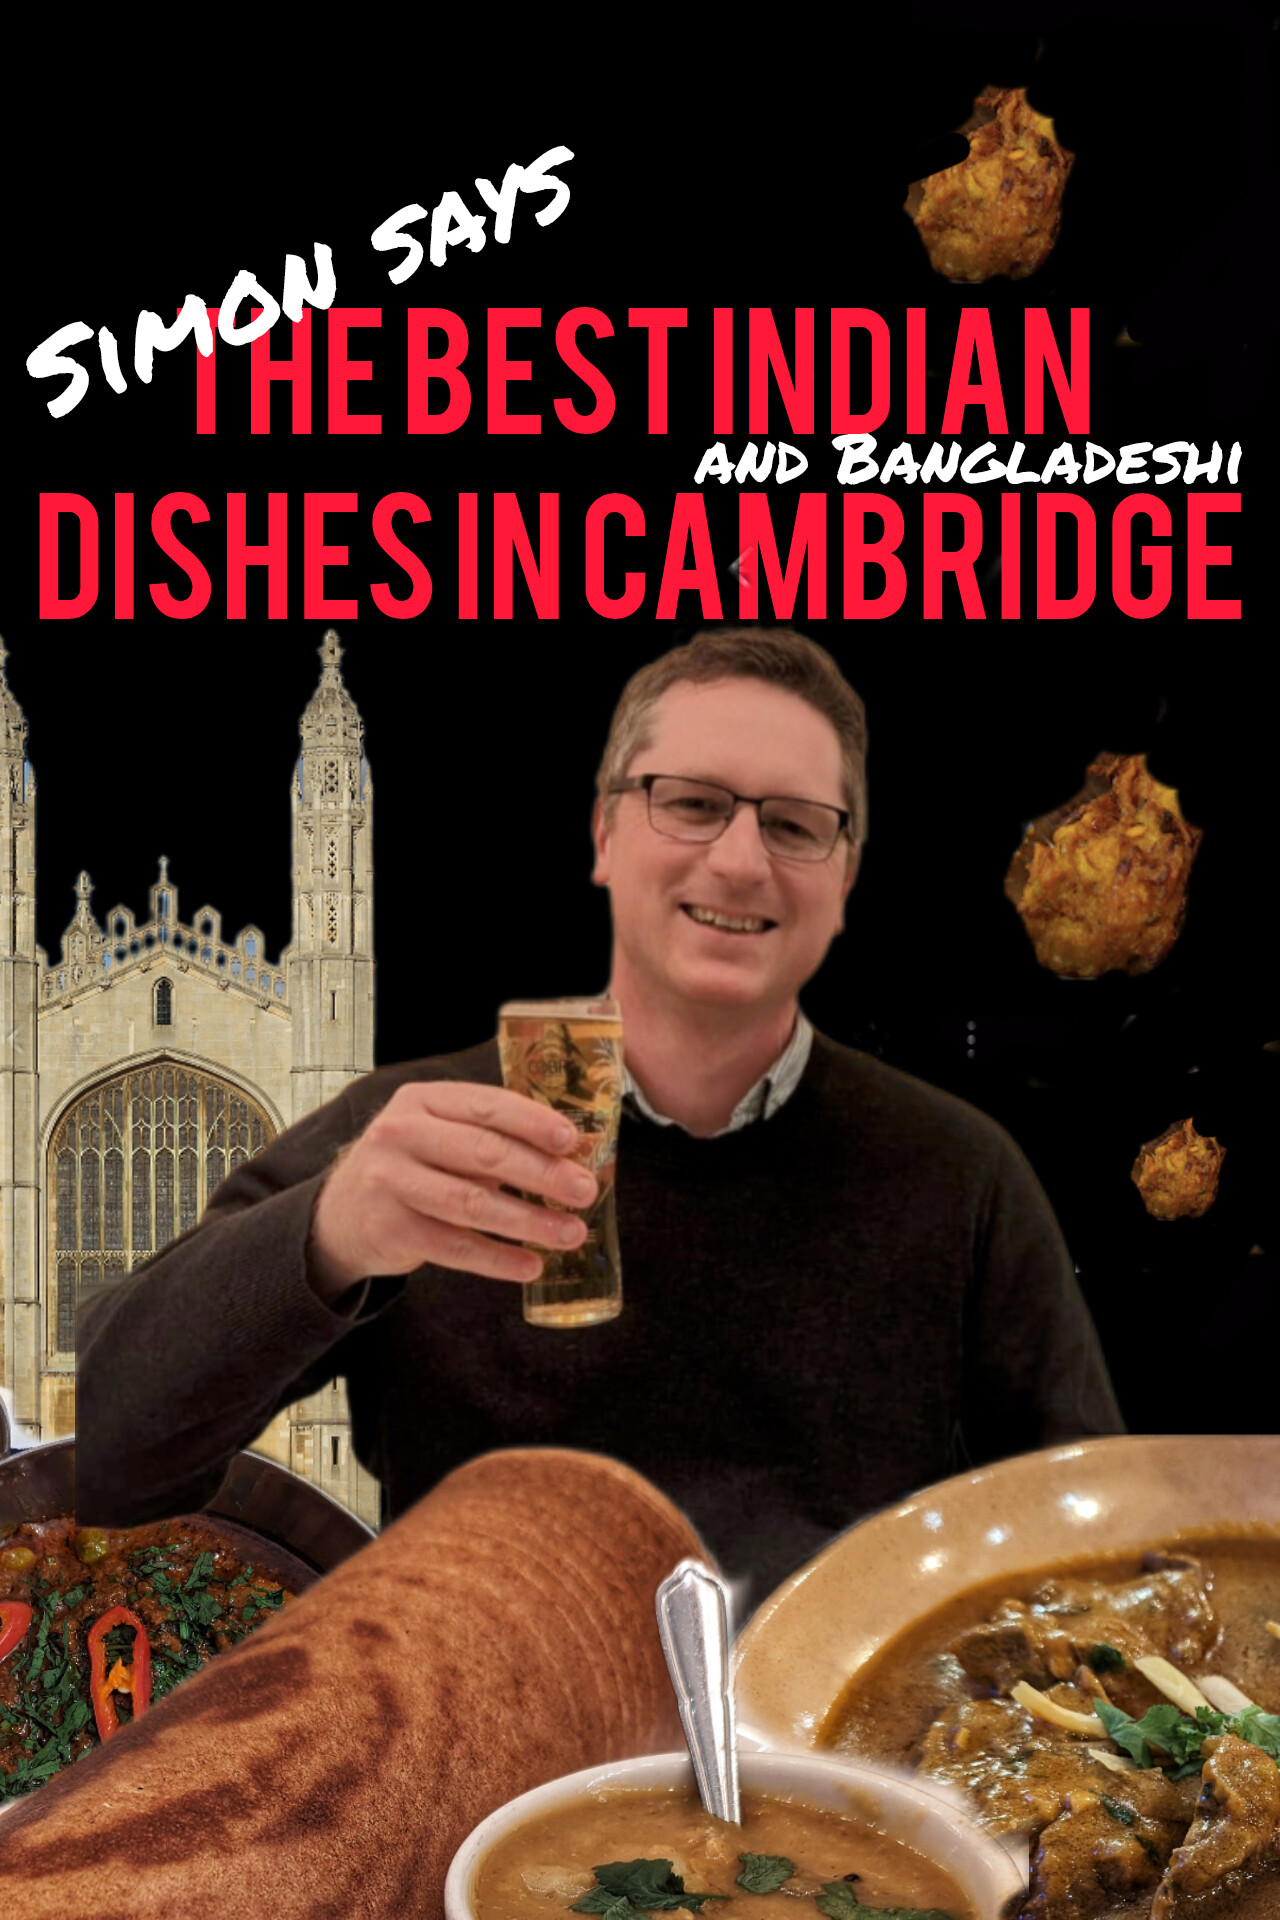 Simon Says: The best Indian dishes in Cambridge!